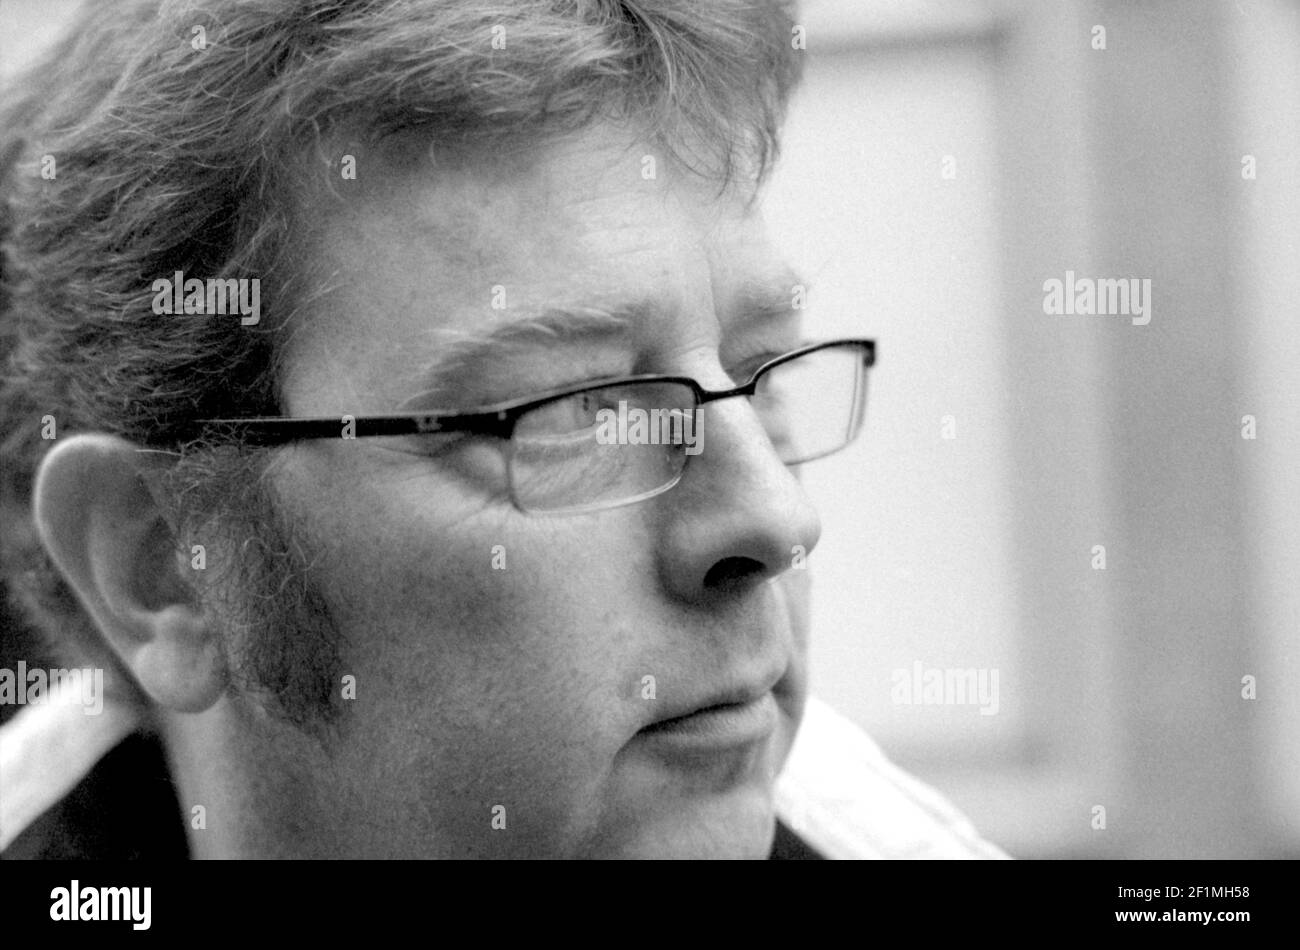 Tilburg, Netherlands. Portrait in Black & White of a mature adult male wearing glasses. Stock Photo